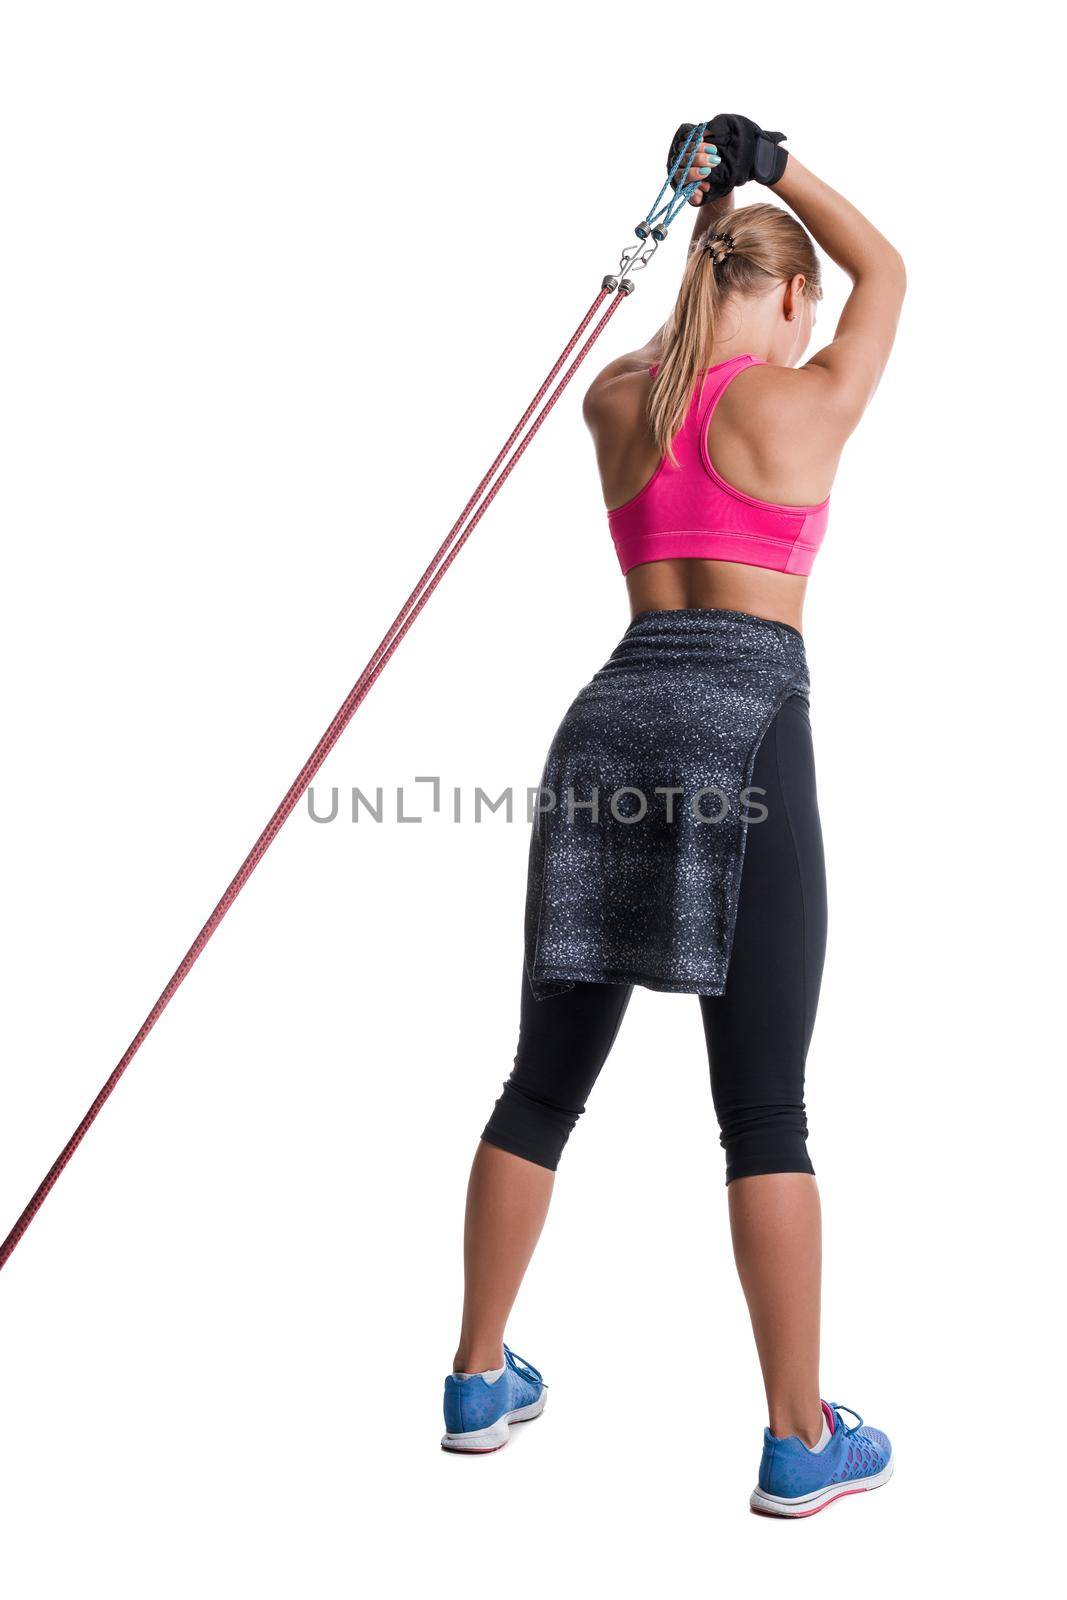 Strong woman using a resistance band in her exercise routine. Young woman performs fitness exercises on white background. Woman with beautiful slim healthy body posing in studio.